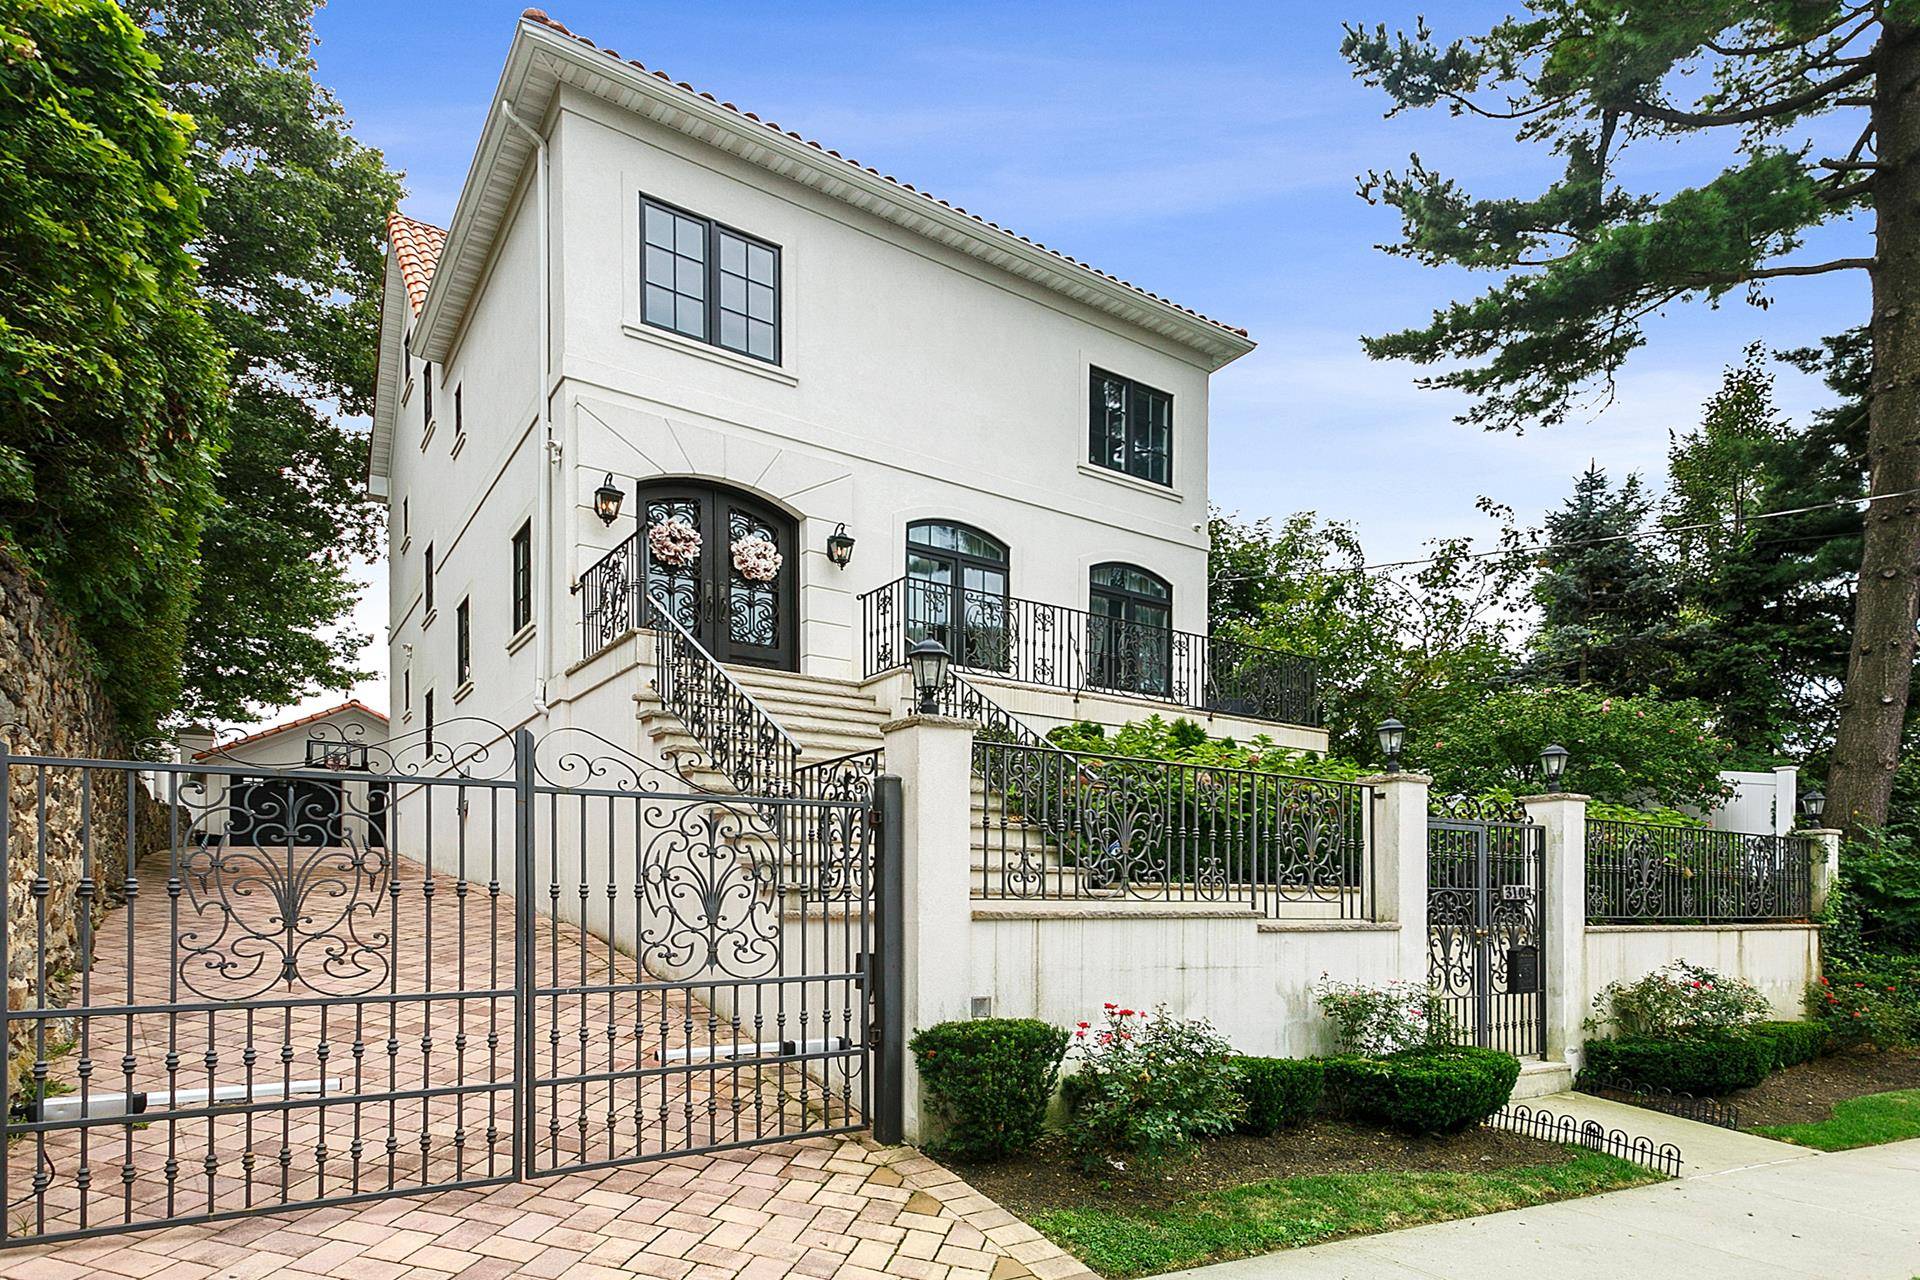 Mediterranean house with a lovely garden amp ; patio, built in 2016 in the heart of Riverdale.